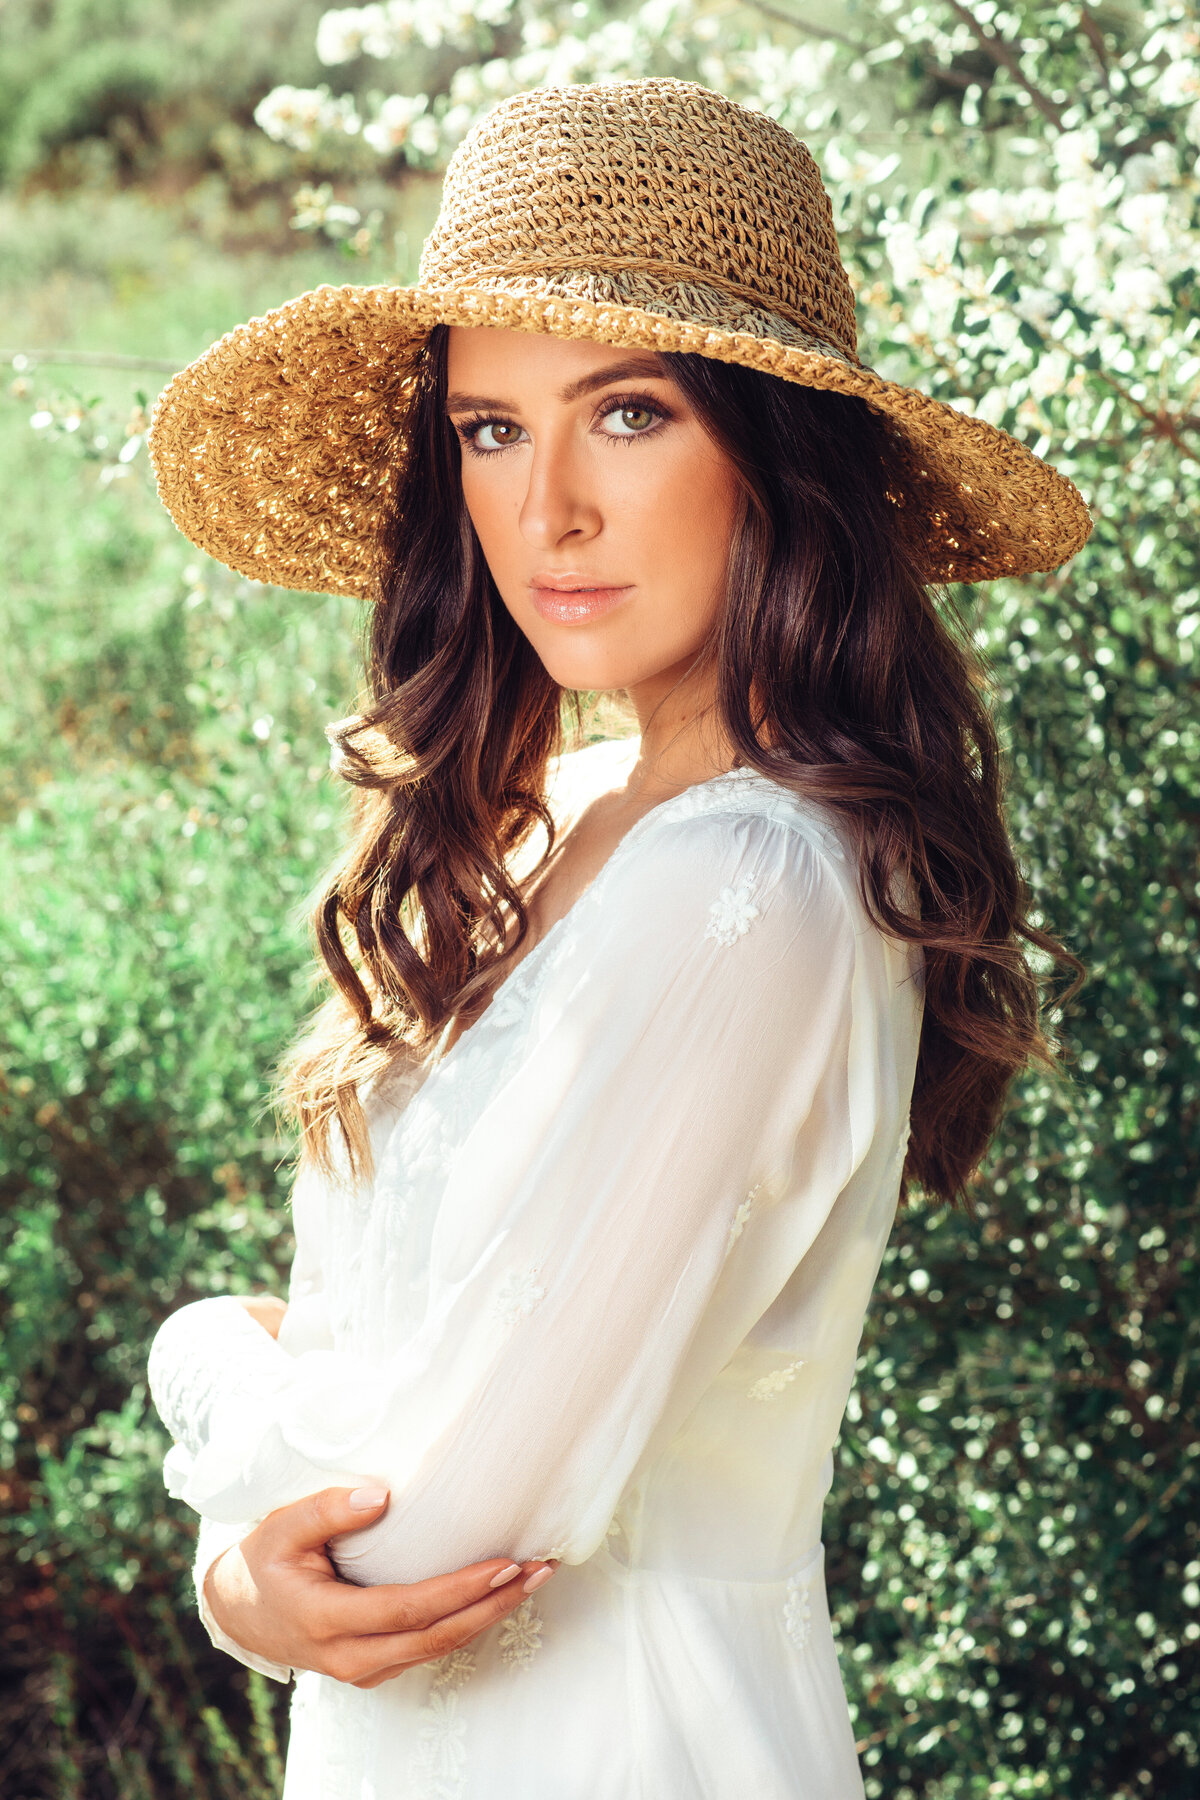 Portrait Photo Of Young Woman In White Long Sleeves Los Angeles